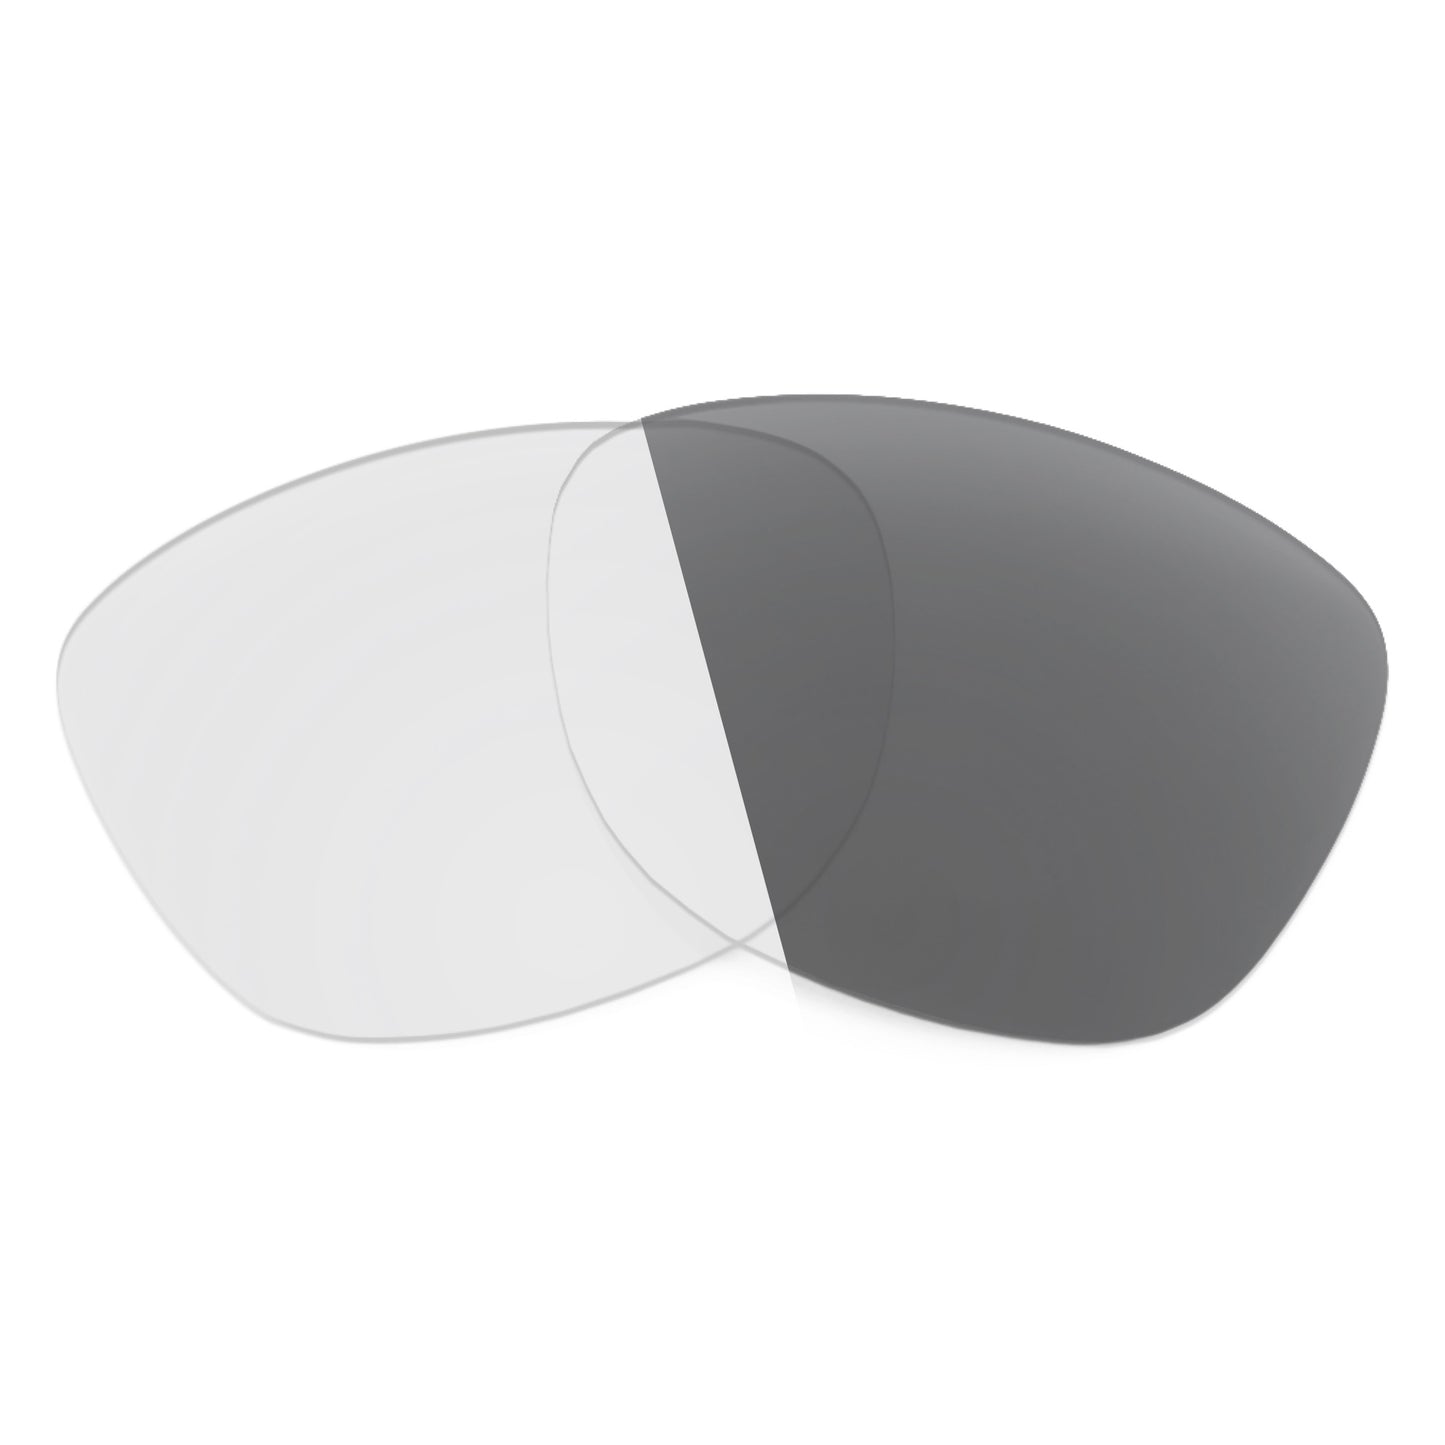 Revant replacement lenses for Ray-Ban RB4274 53mm Non-Polarized Adapt Gray Photochromic